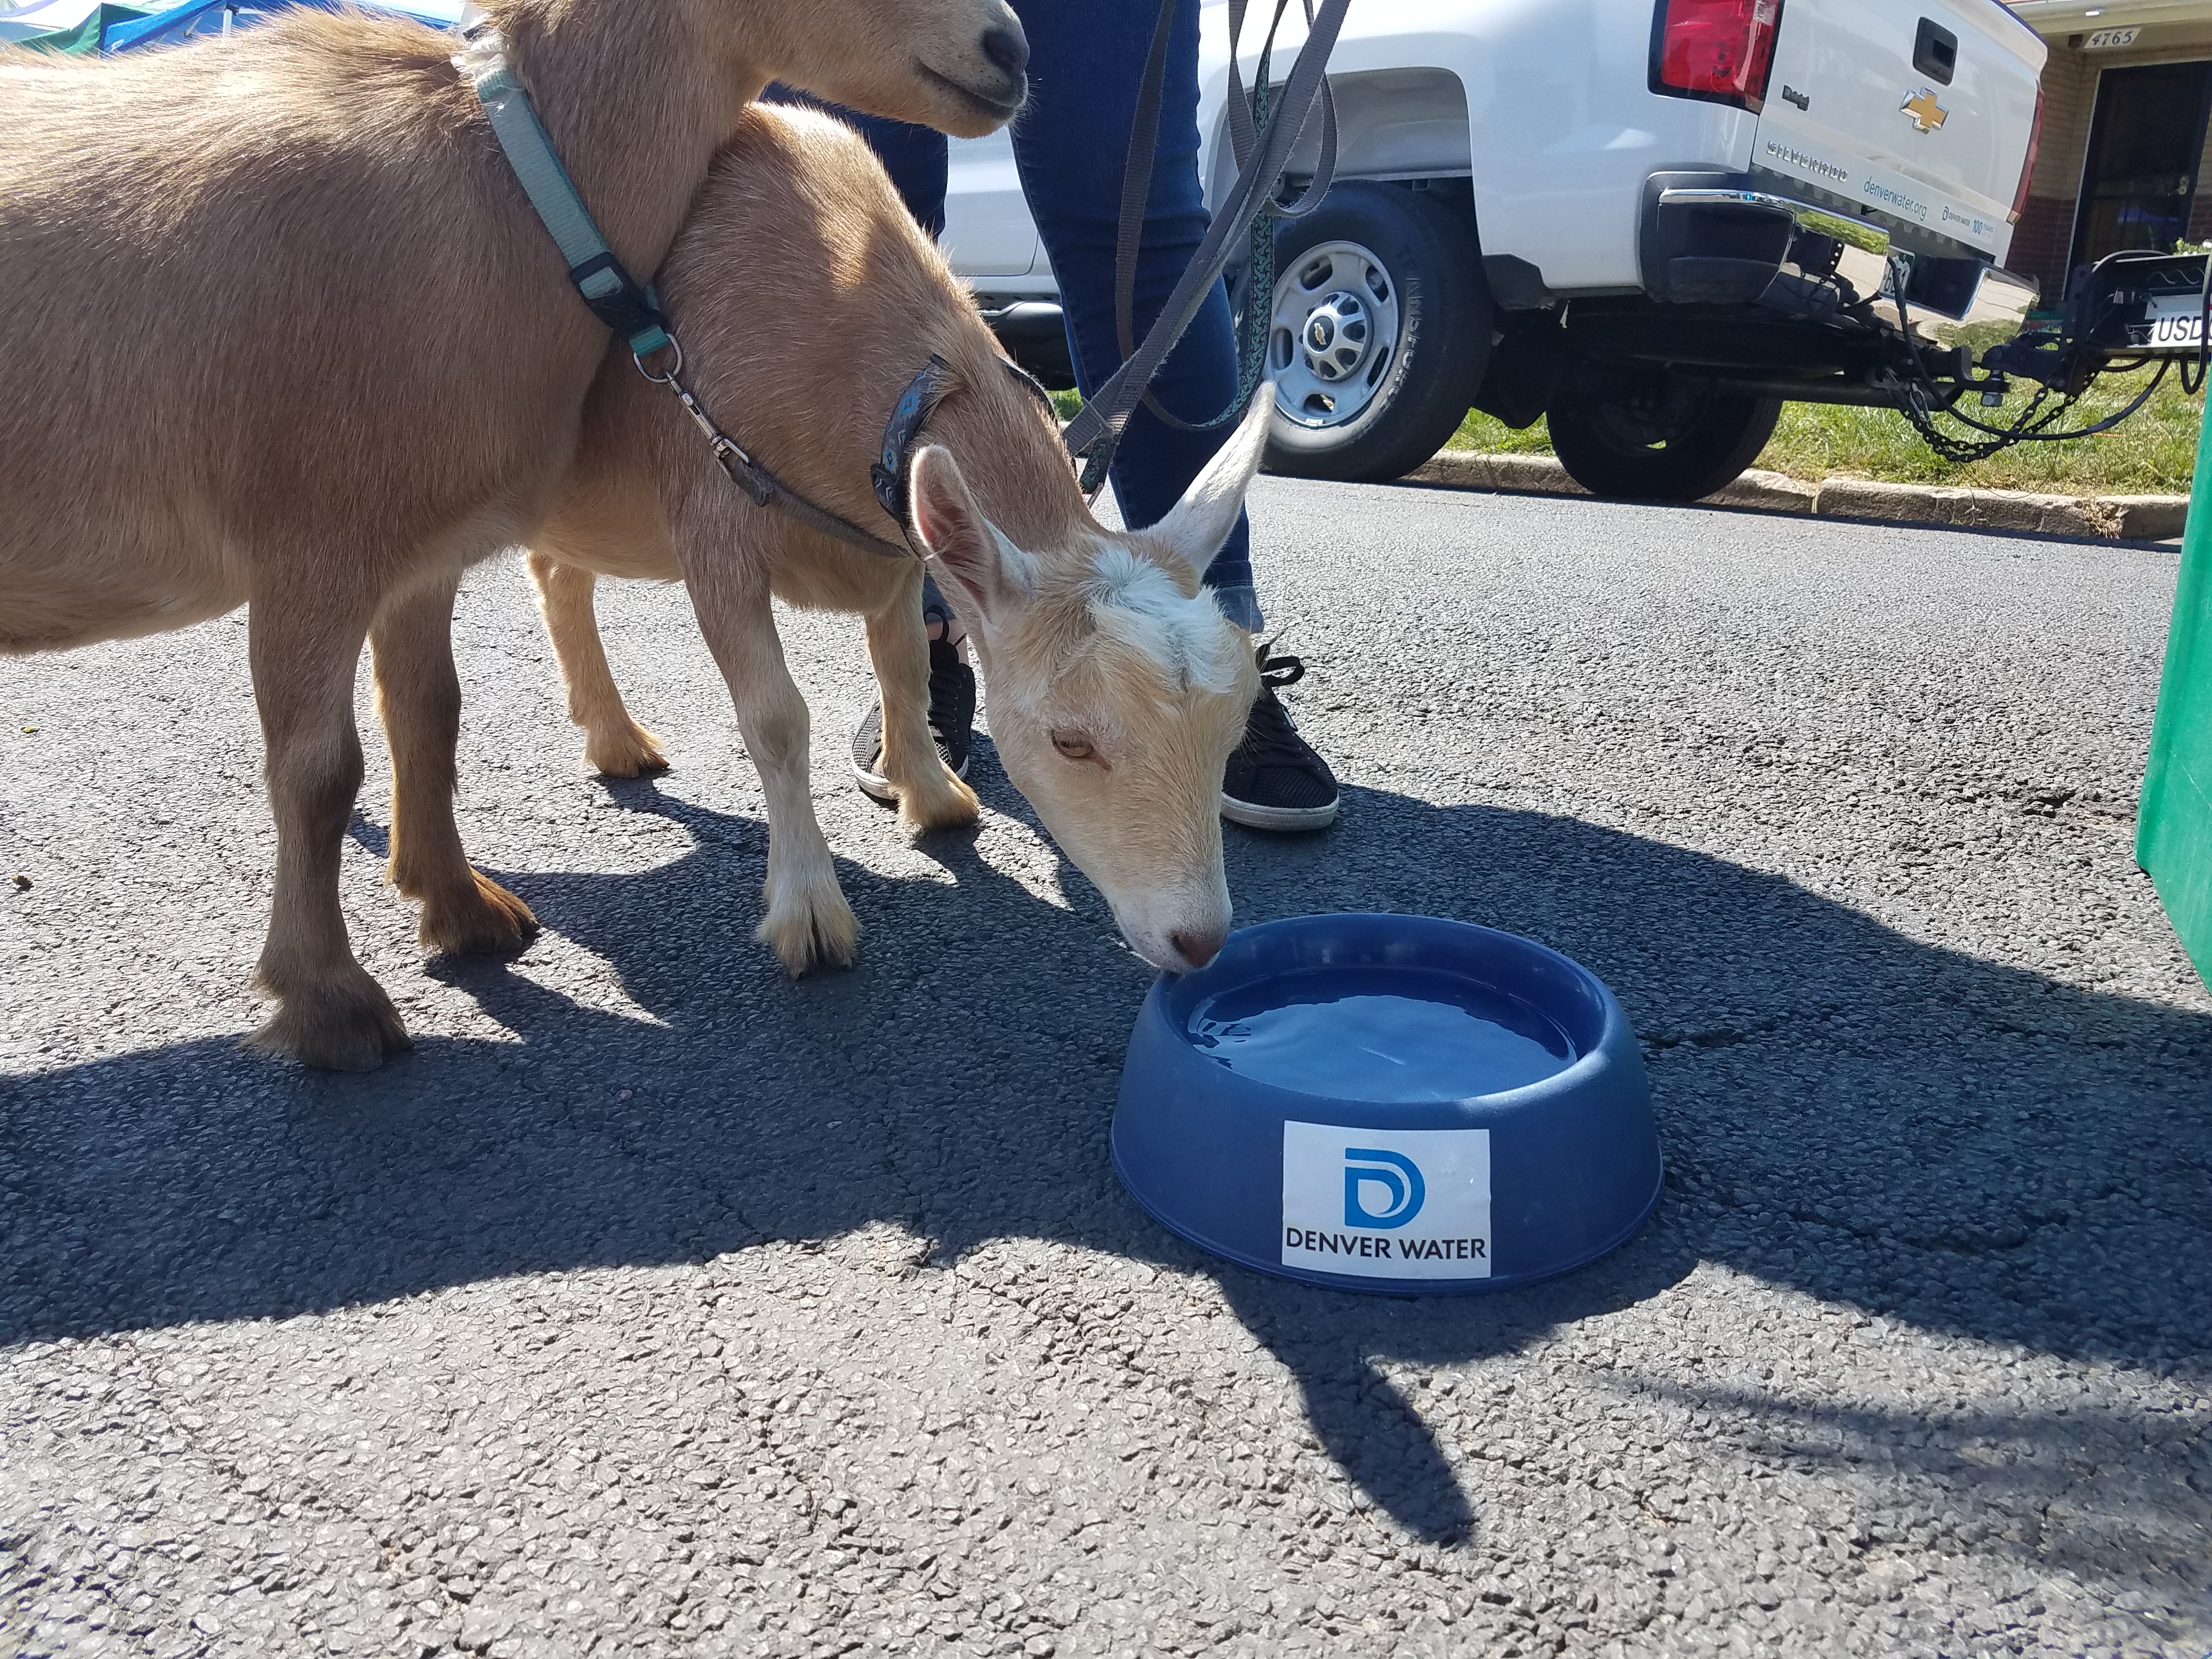 Goats drinking water provided Denver Water volunteers at an event at the GrowHaus.